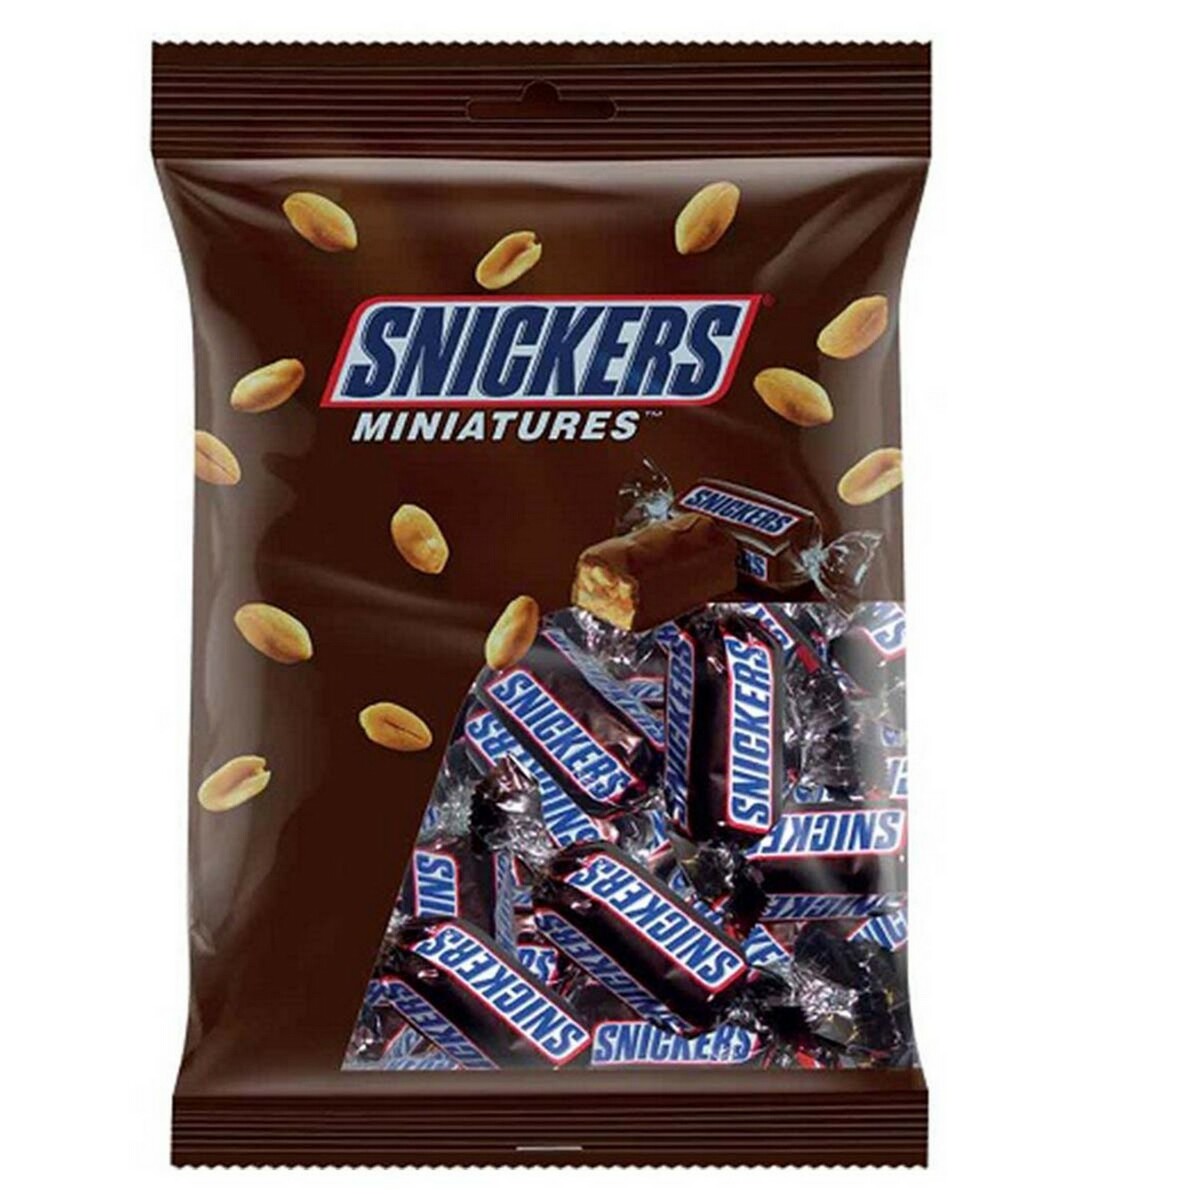 Snickers Miniatures 120gm